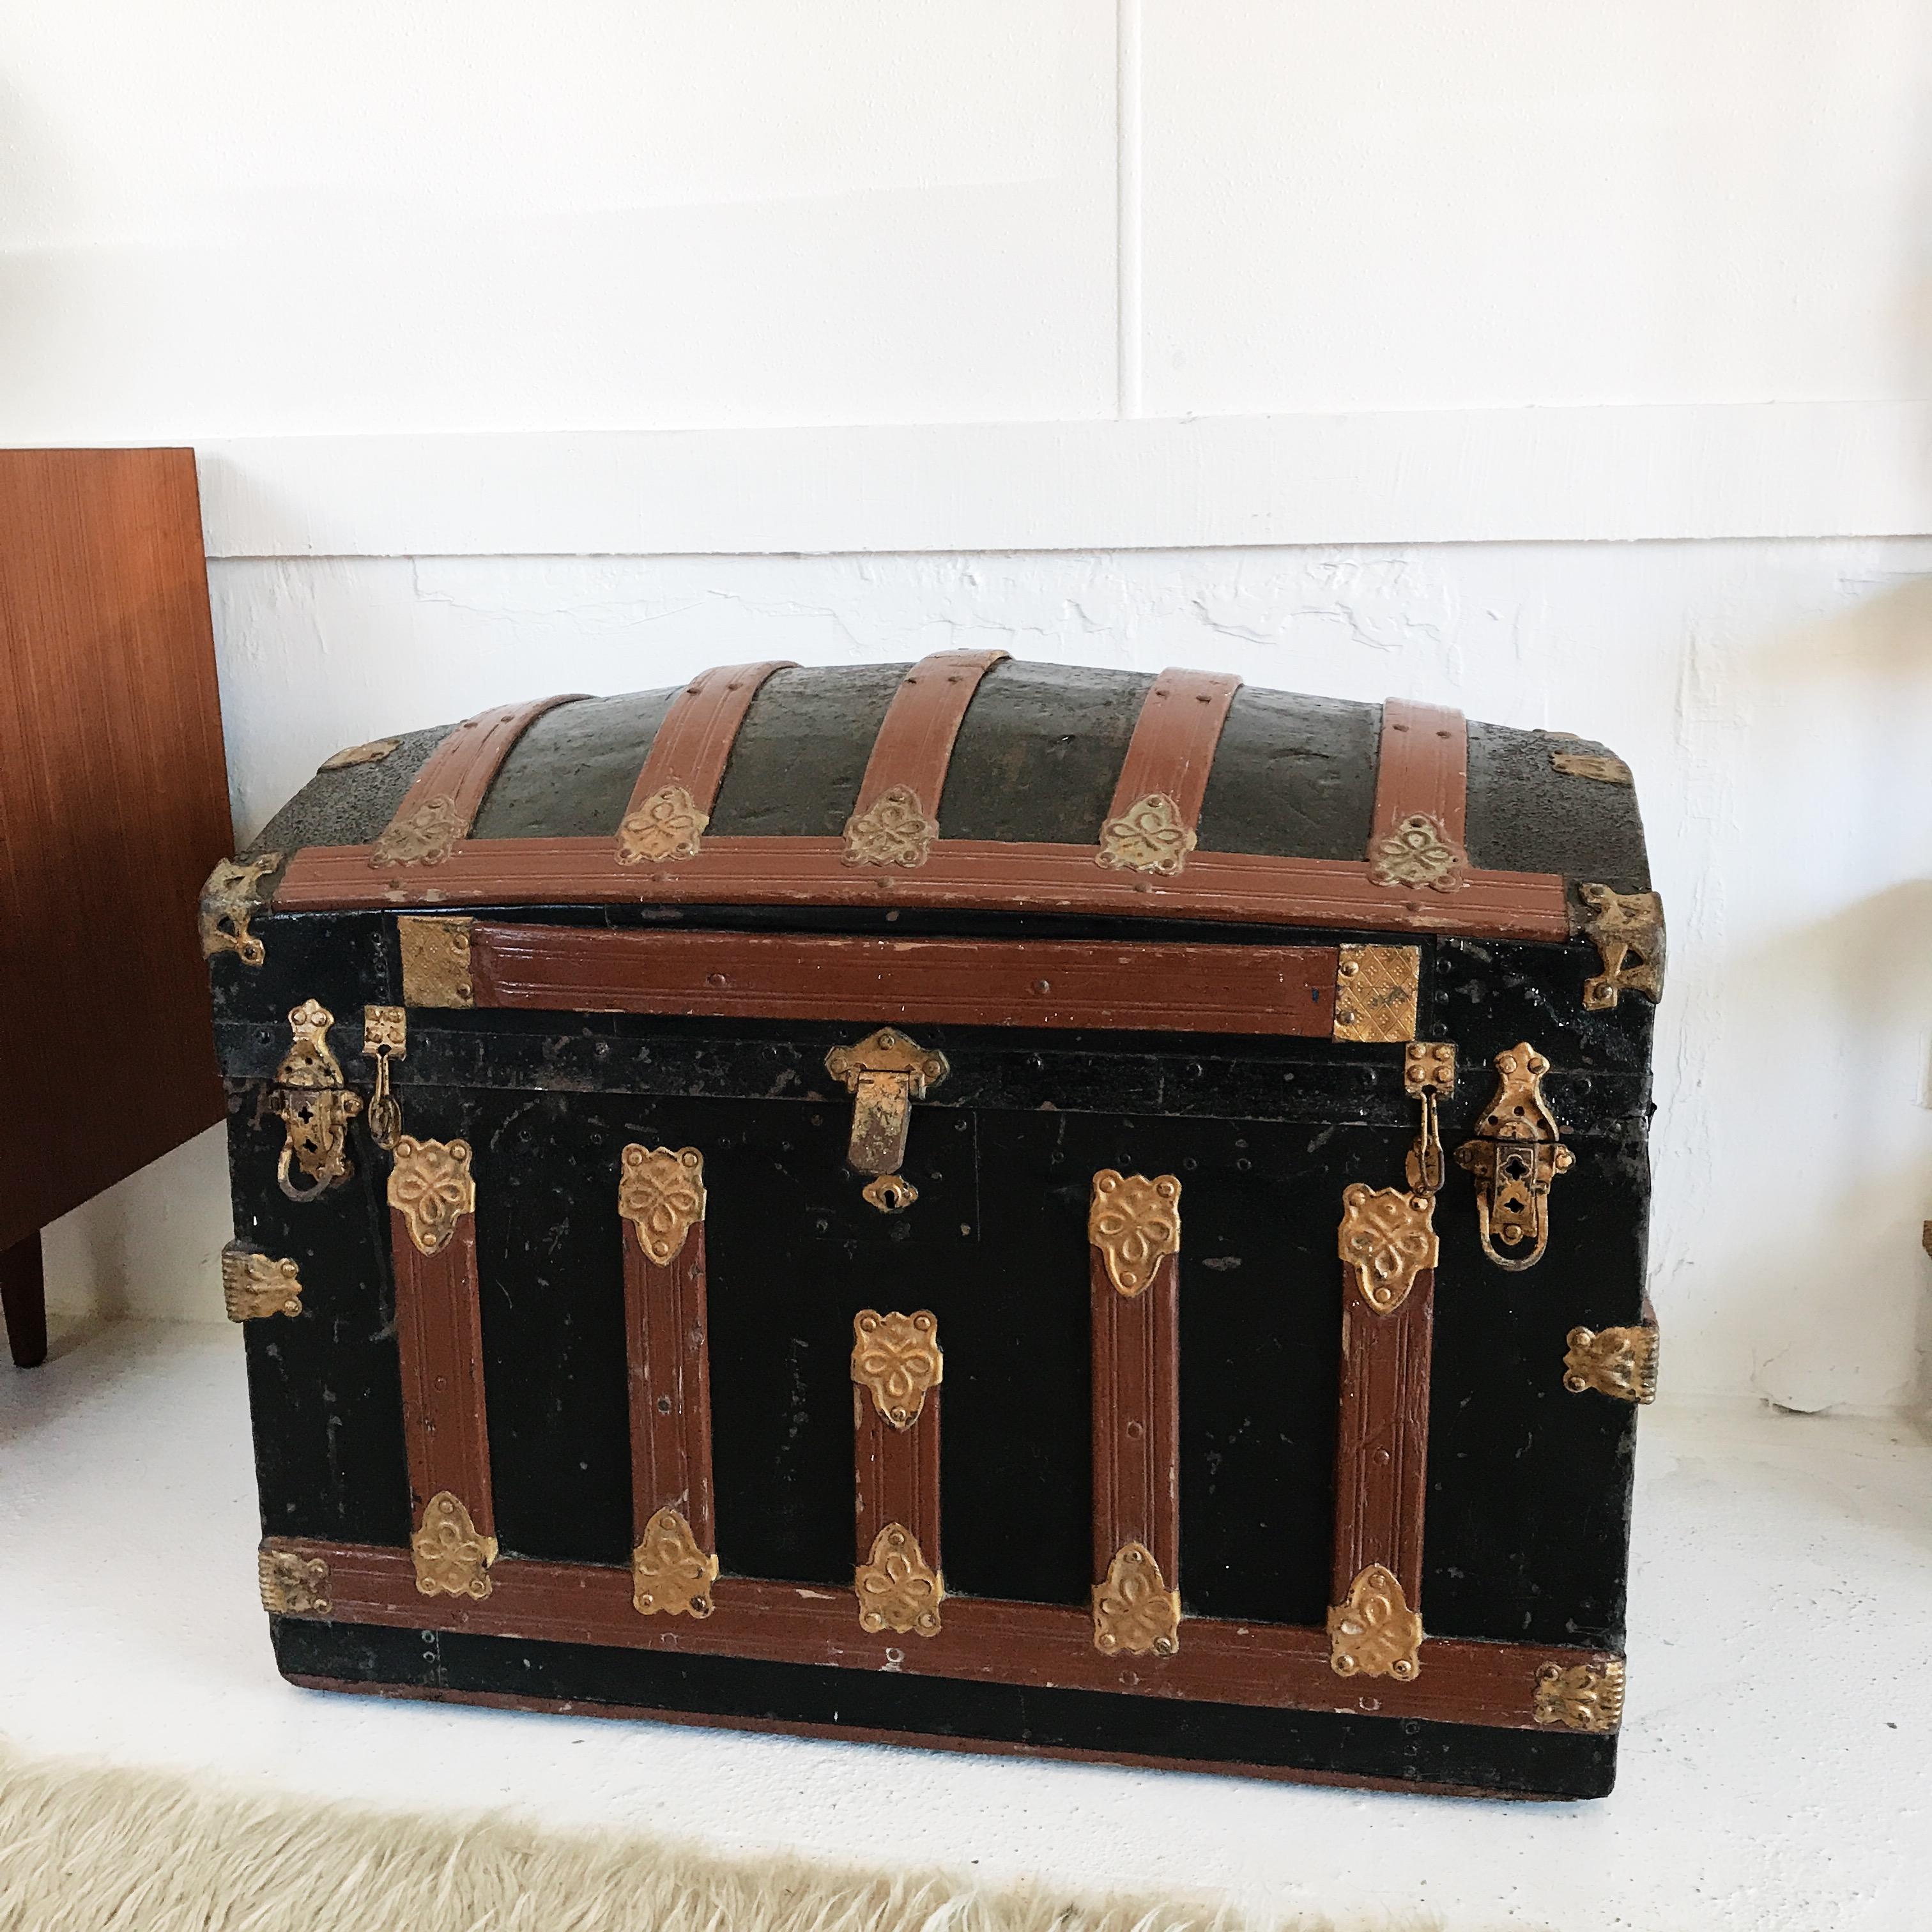 Gauchely hand painted and splendidly patinated, pirate style, arch-lidded continental chest. Features 